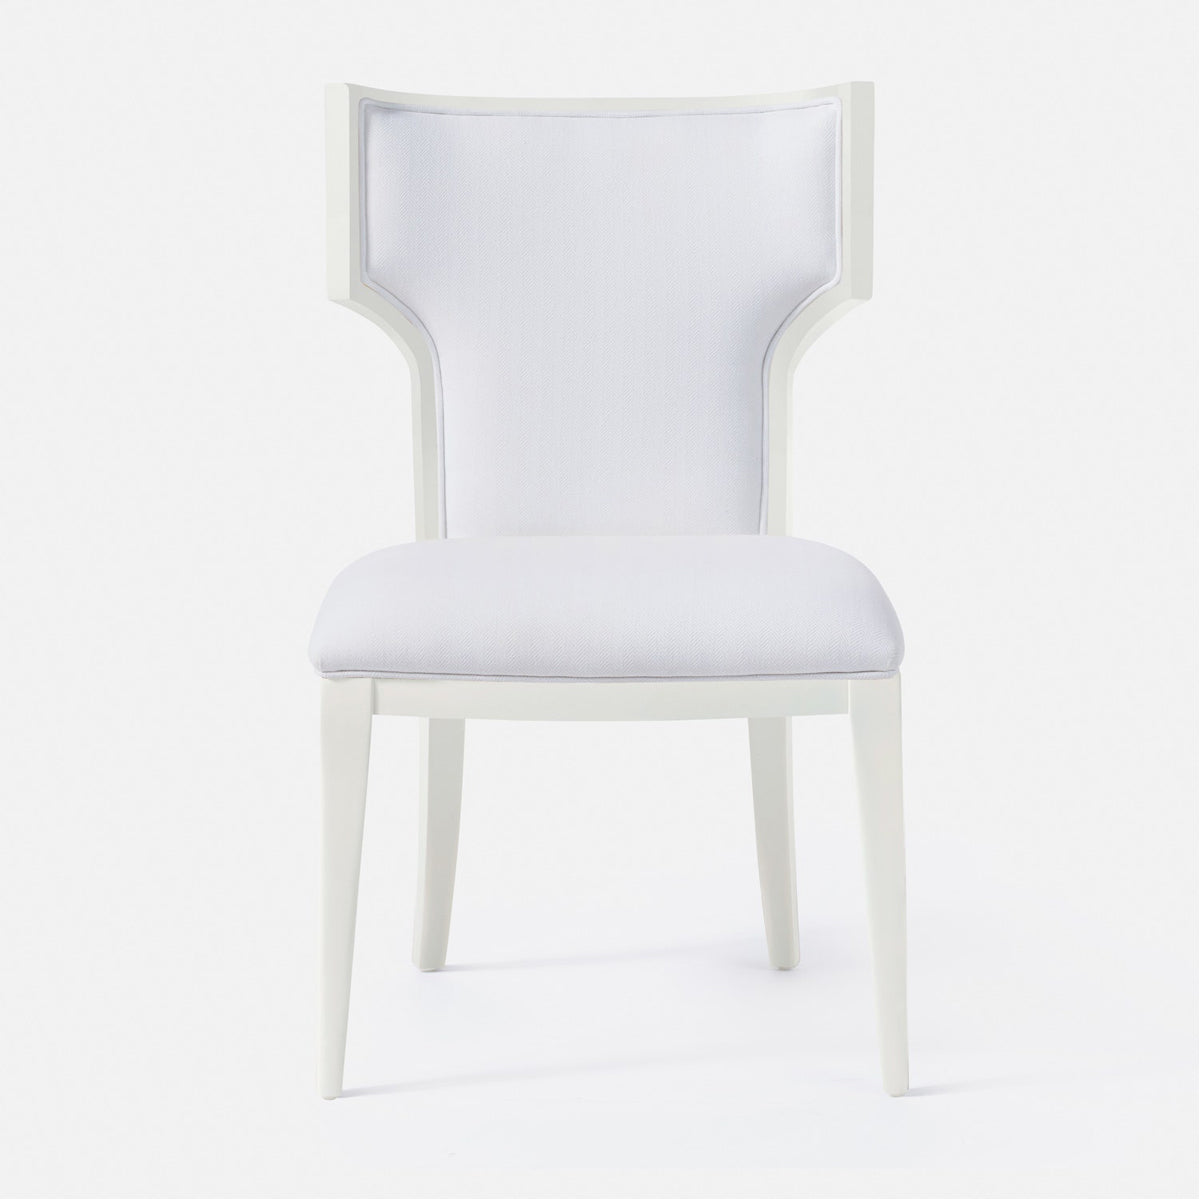 Made Goods Carleen Wingback Dining Chair in Danube Fabric